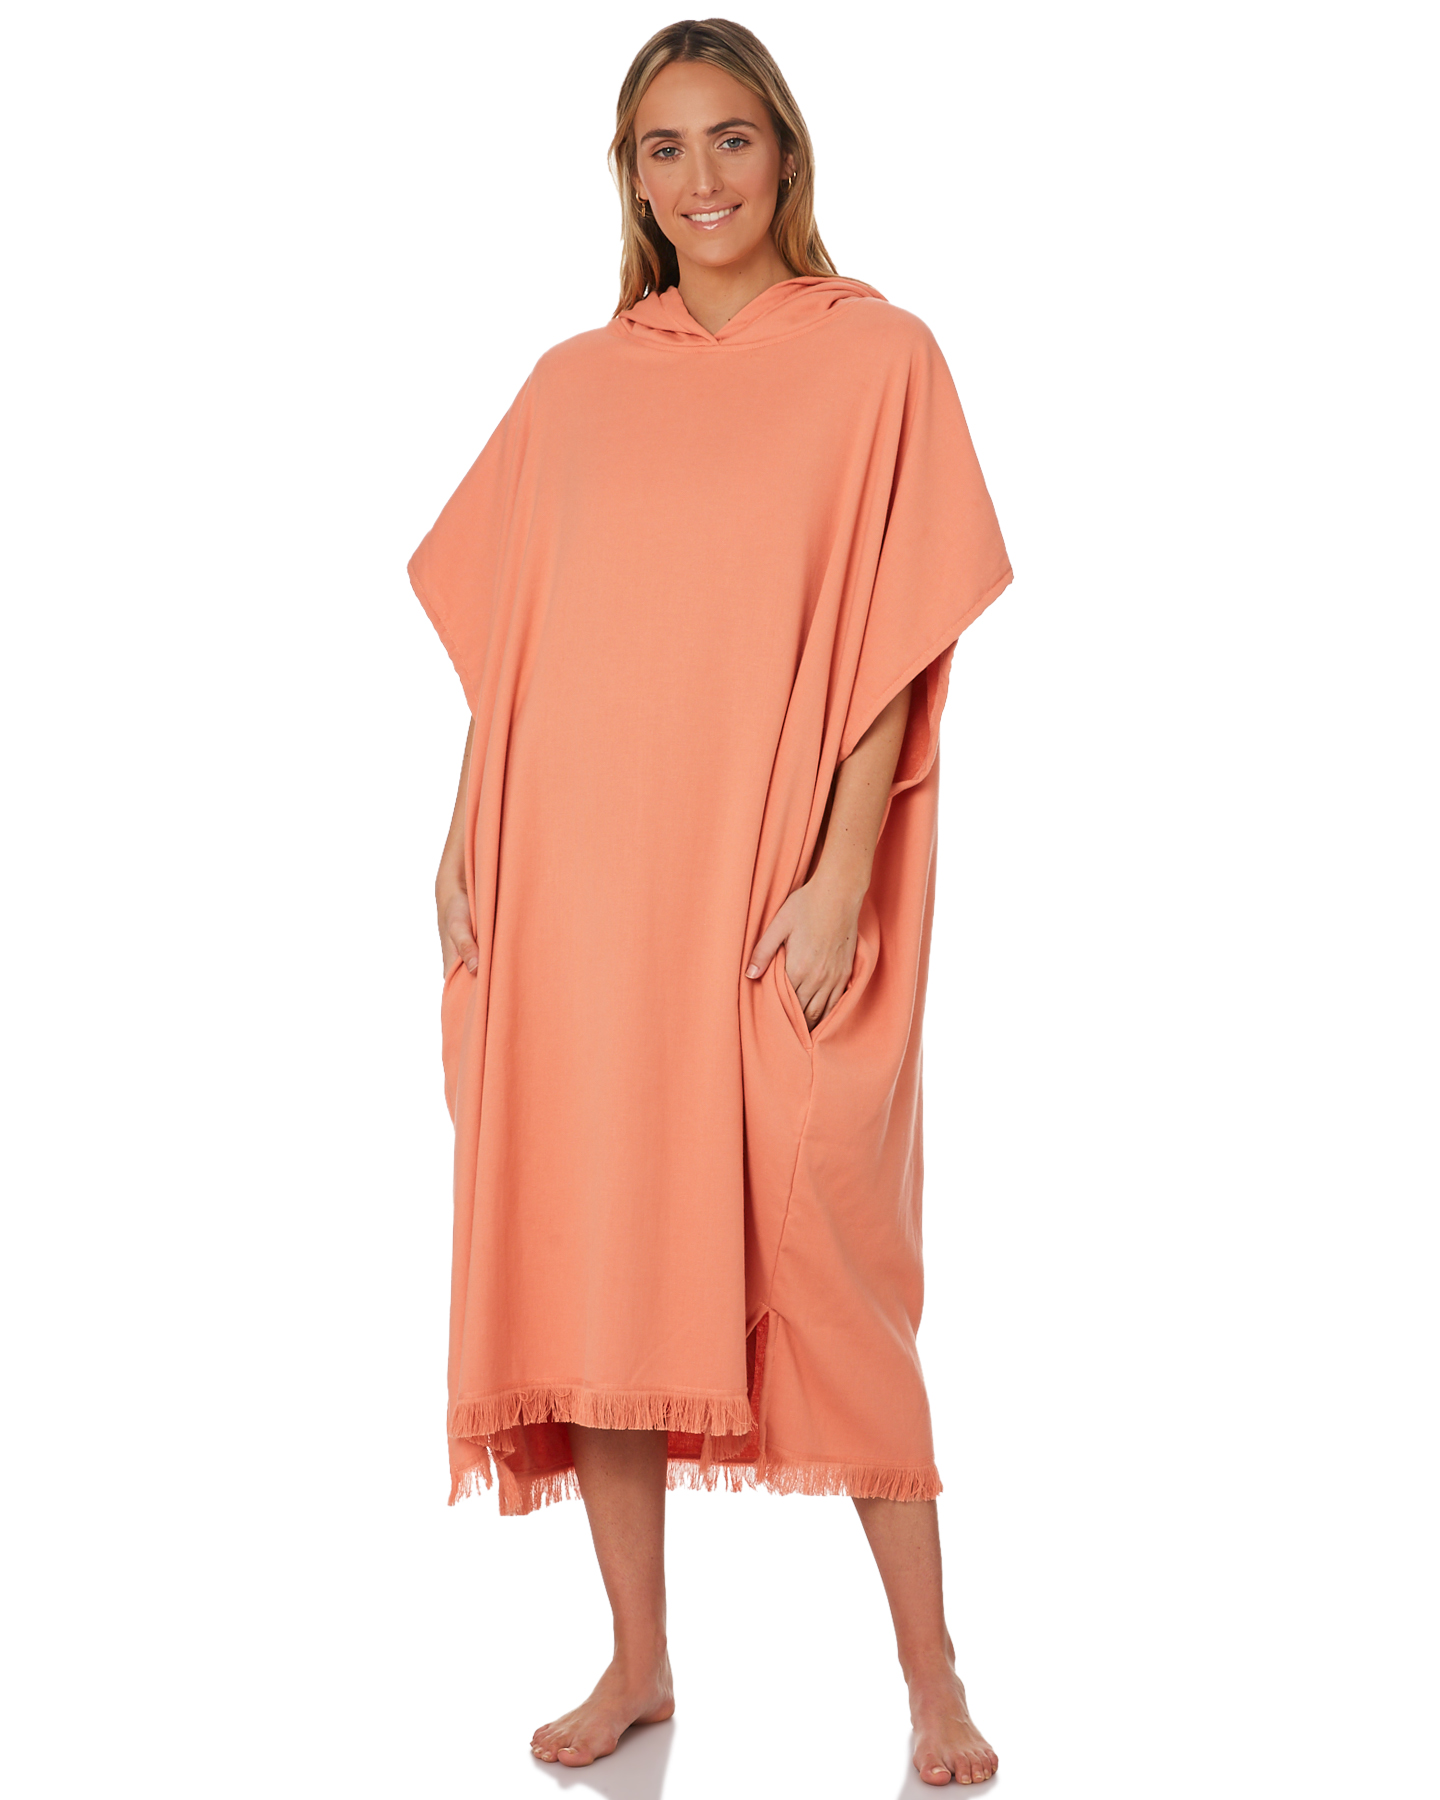 The Beach People Adult Surf Ponchos - Coral | SurfStitch